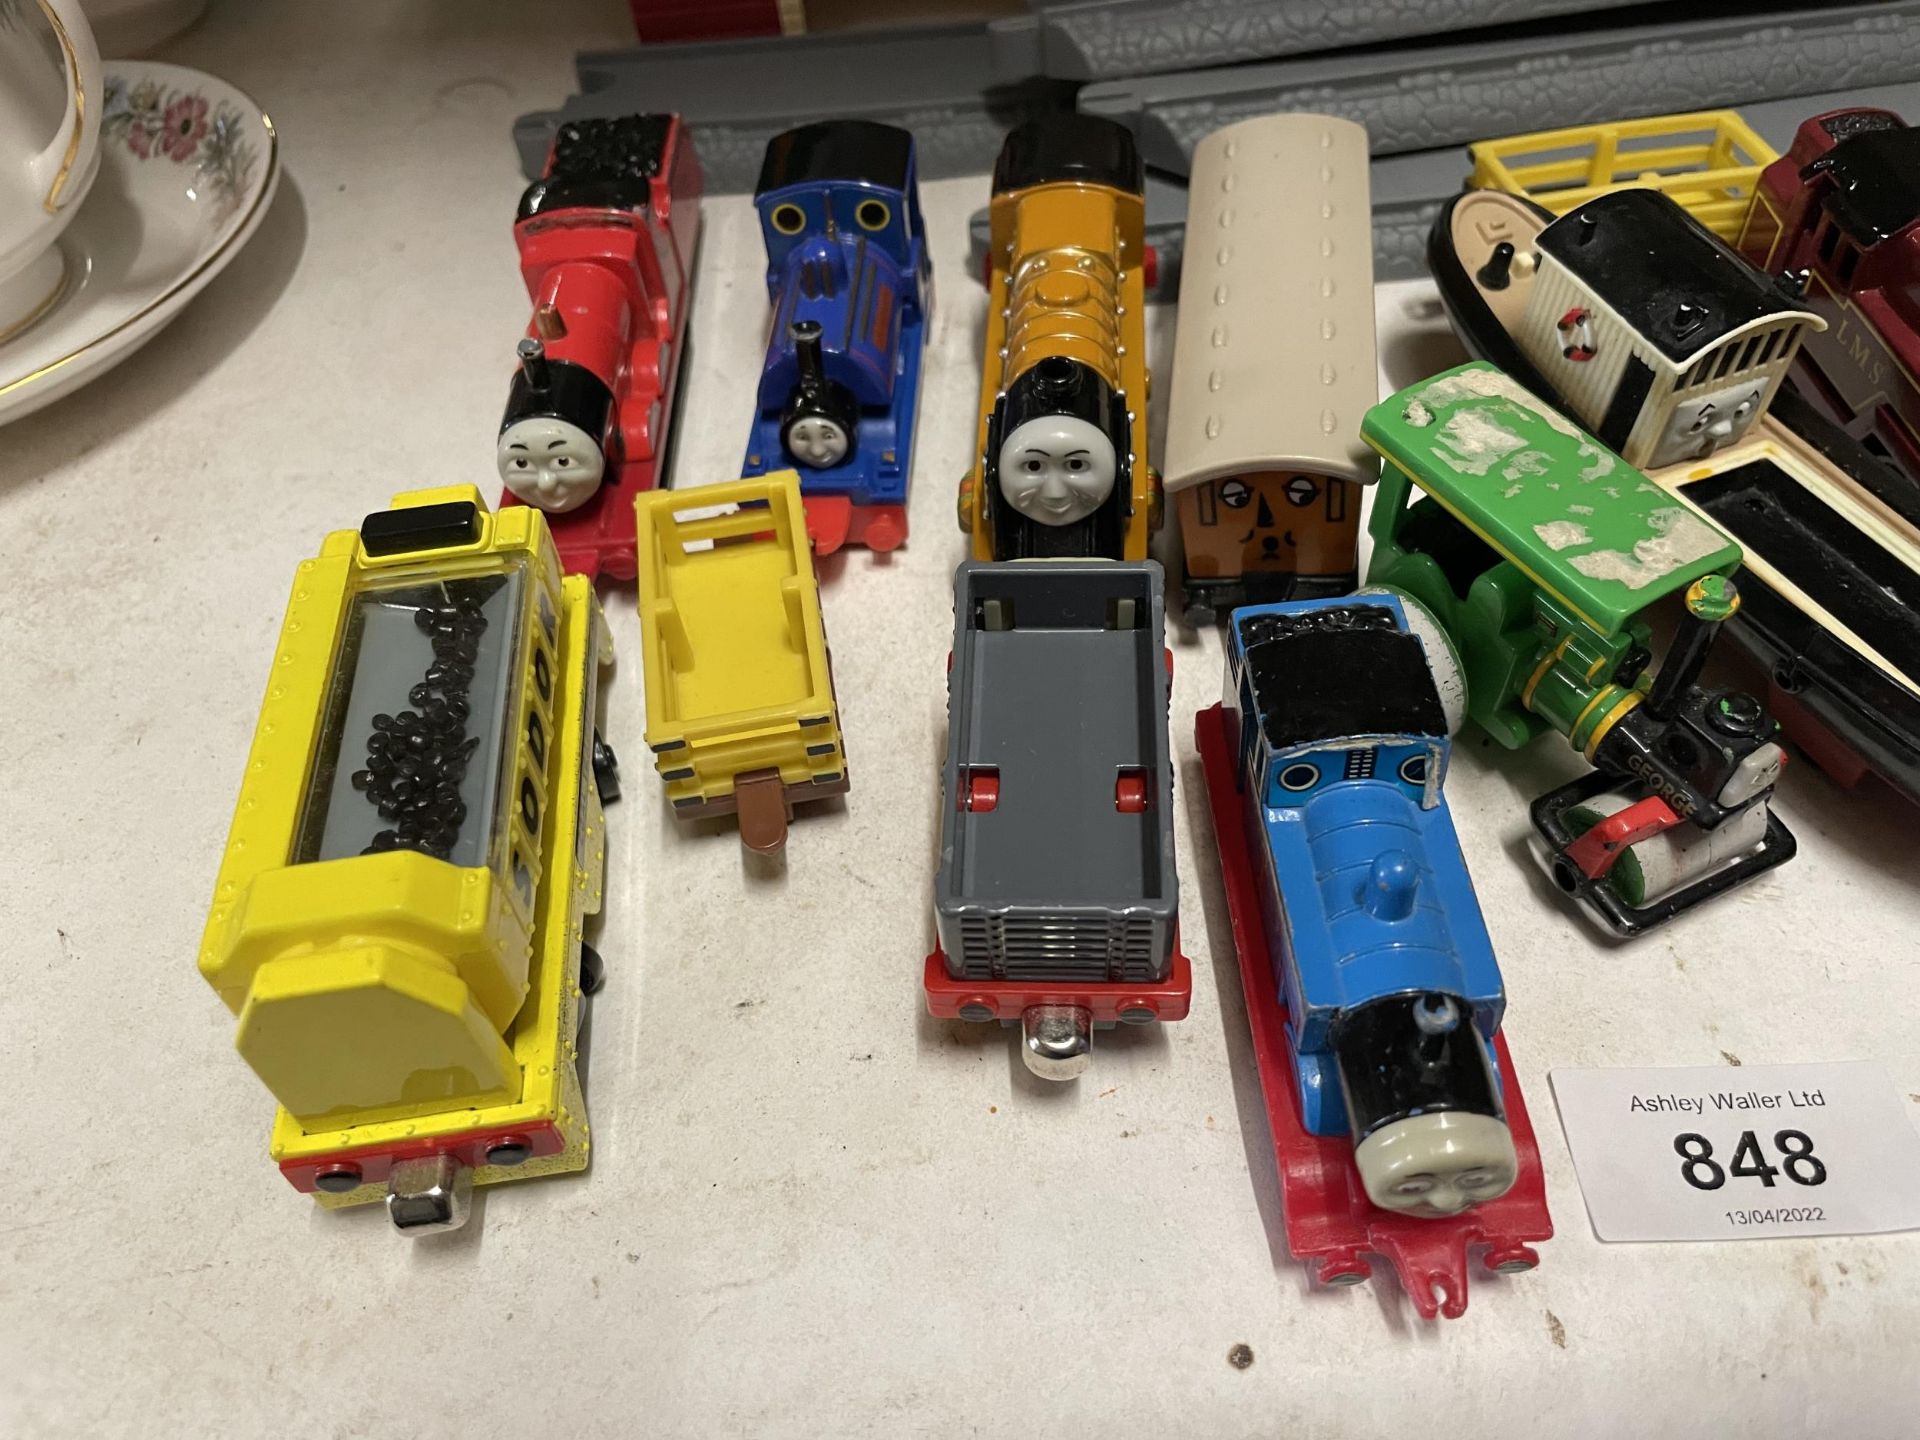 A LARGE AMOUNT OF THOMAS THE TANK ENGINE INCLUDING THOMAS, DIESEL, JAMES, PERCY, TOBY AND MANY - Image 7 of 8